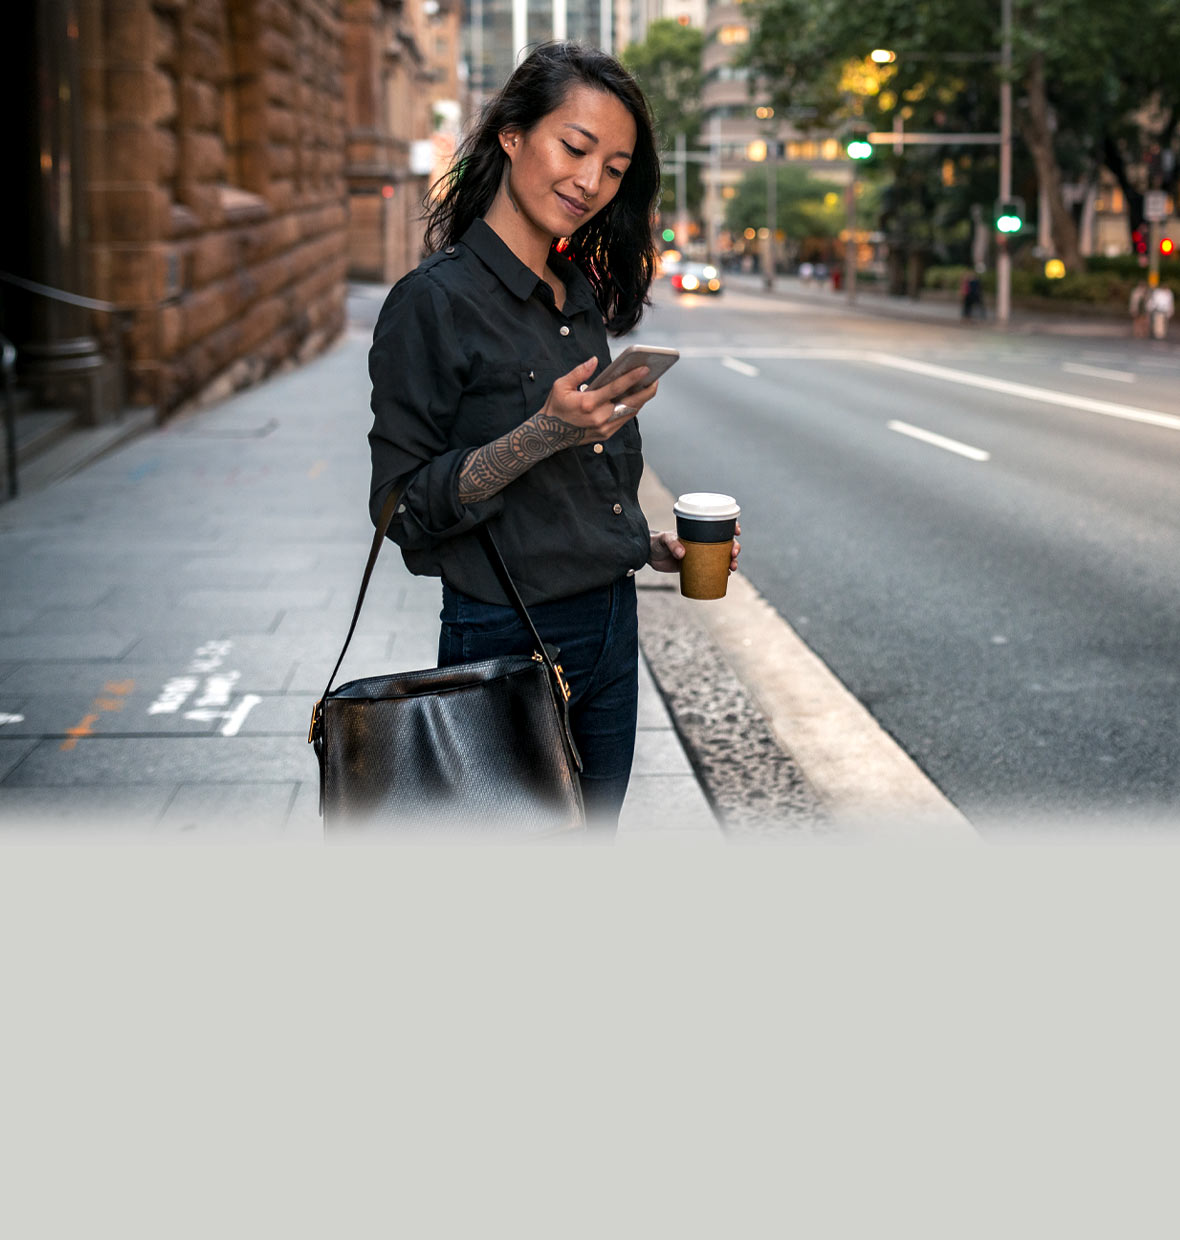 Woman standing on the kerb in a city about to cross the road, getting a phone notification